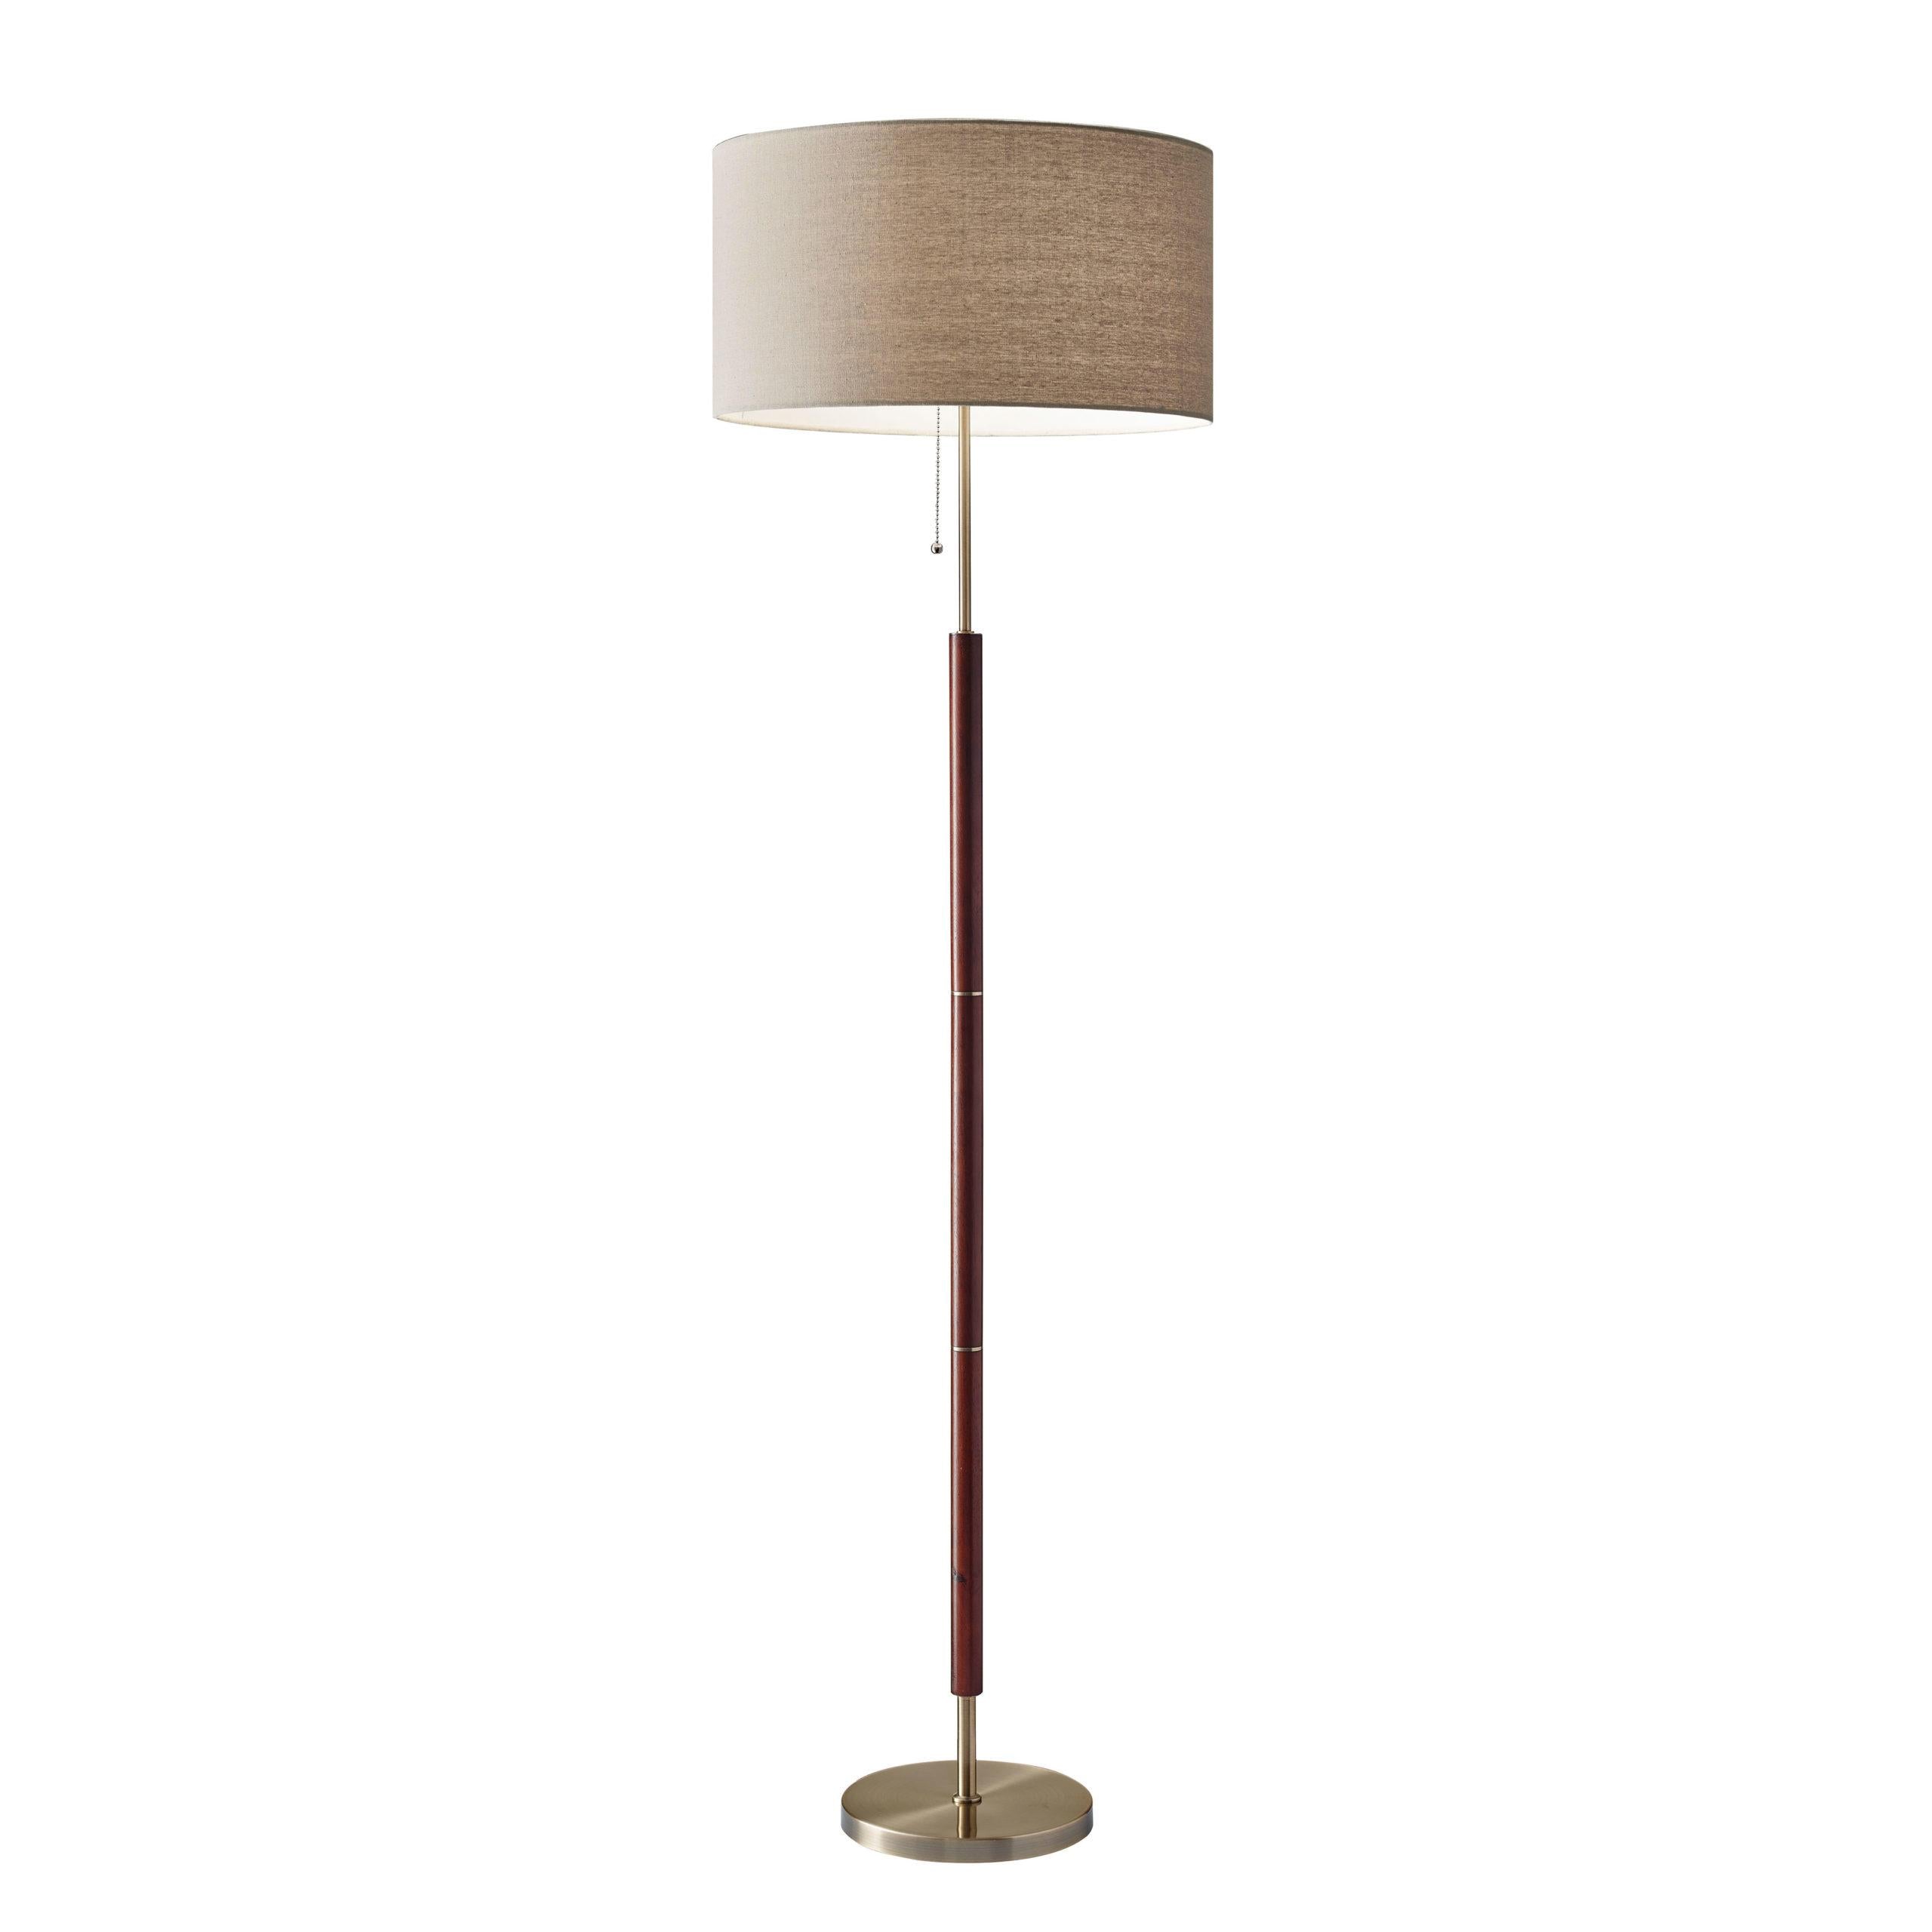 HANOVER Lampe sur pied Bois, Or - 3377-15 | ADESSO